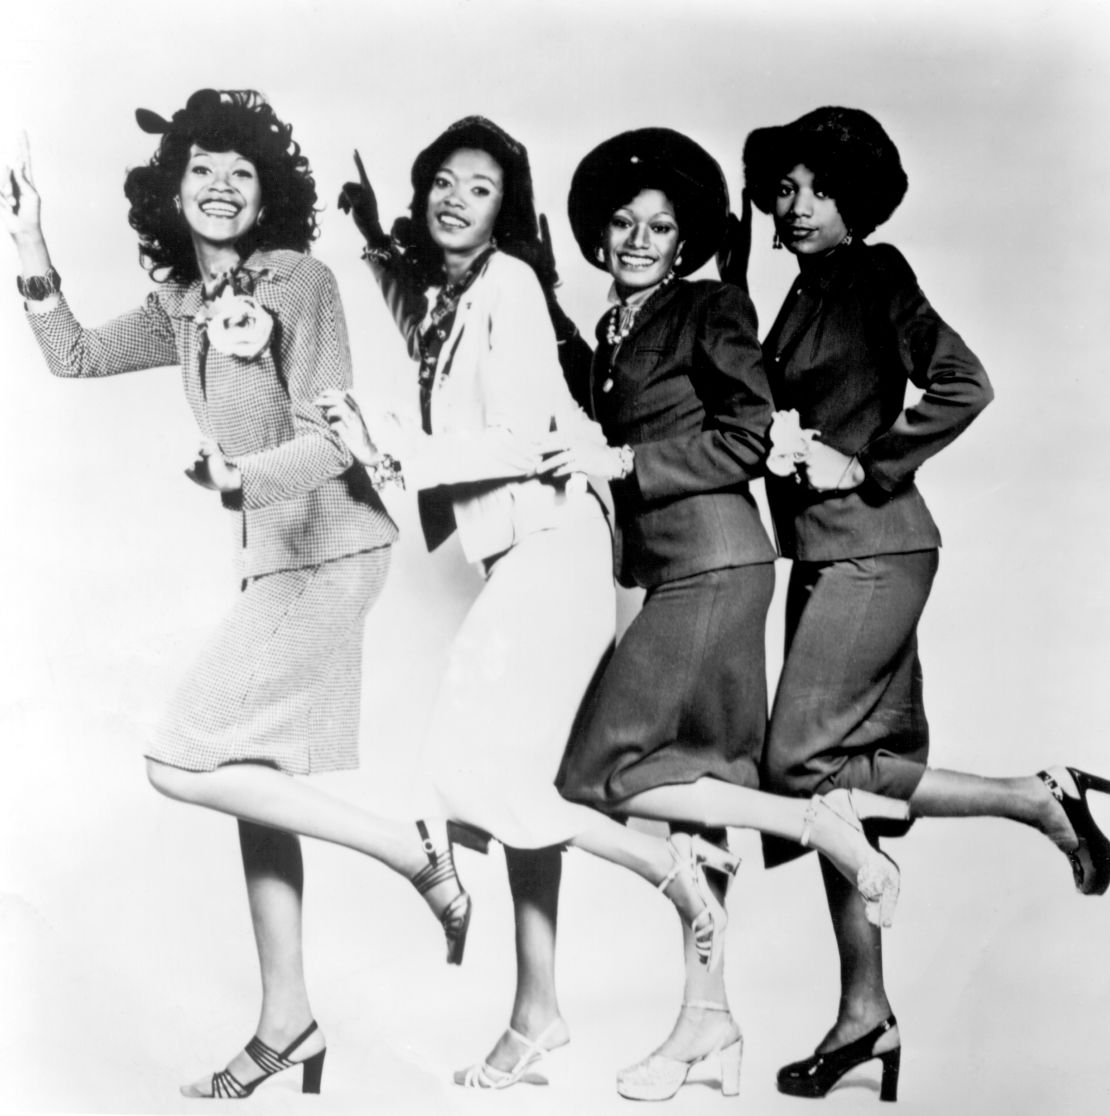 The Pointer Sisters, photographed around 1970. (Photo by Michael Ochs Archives/Getty Images)